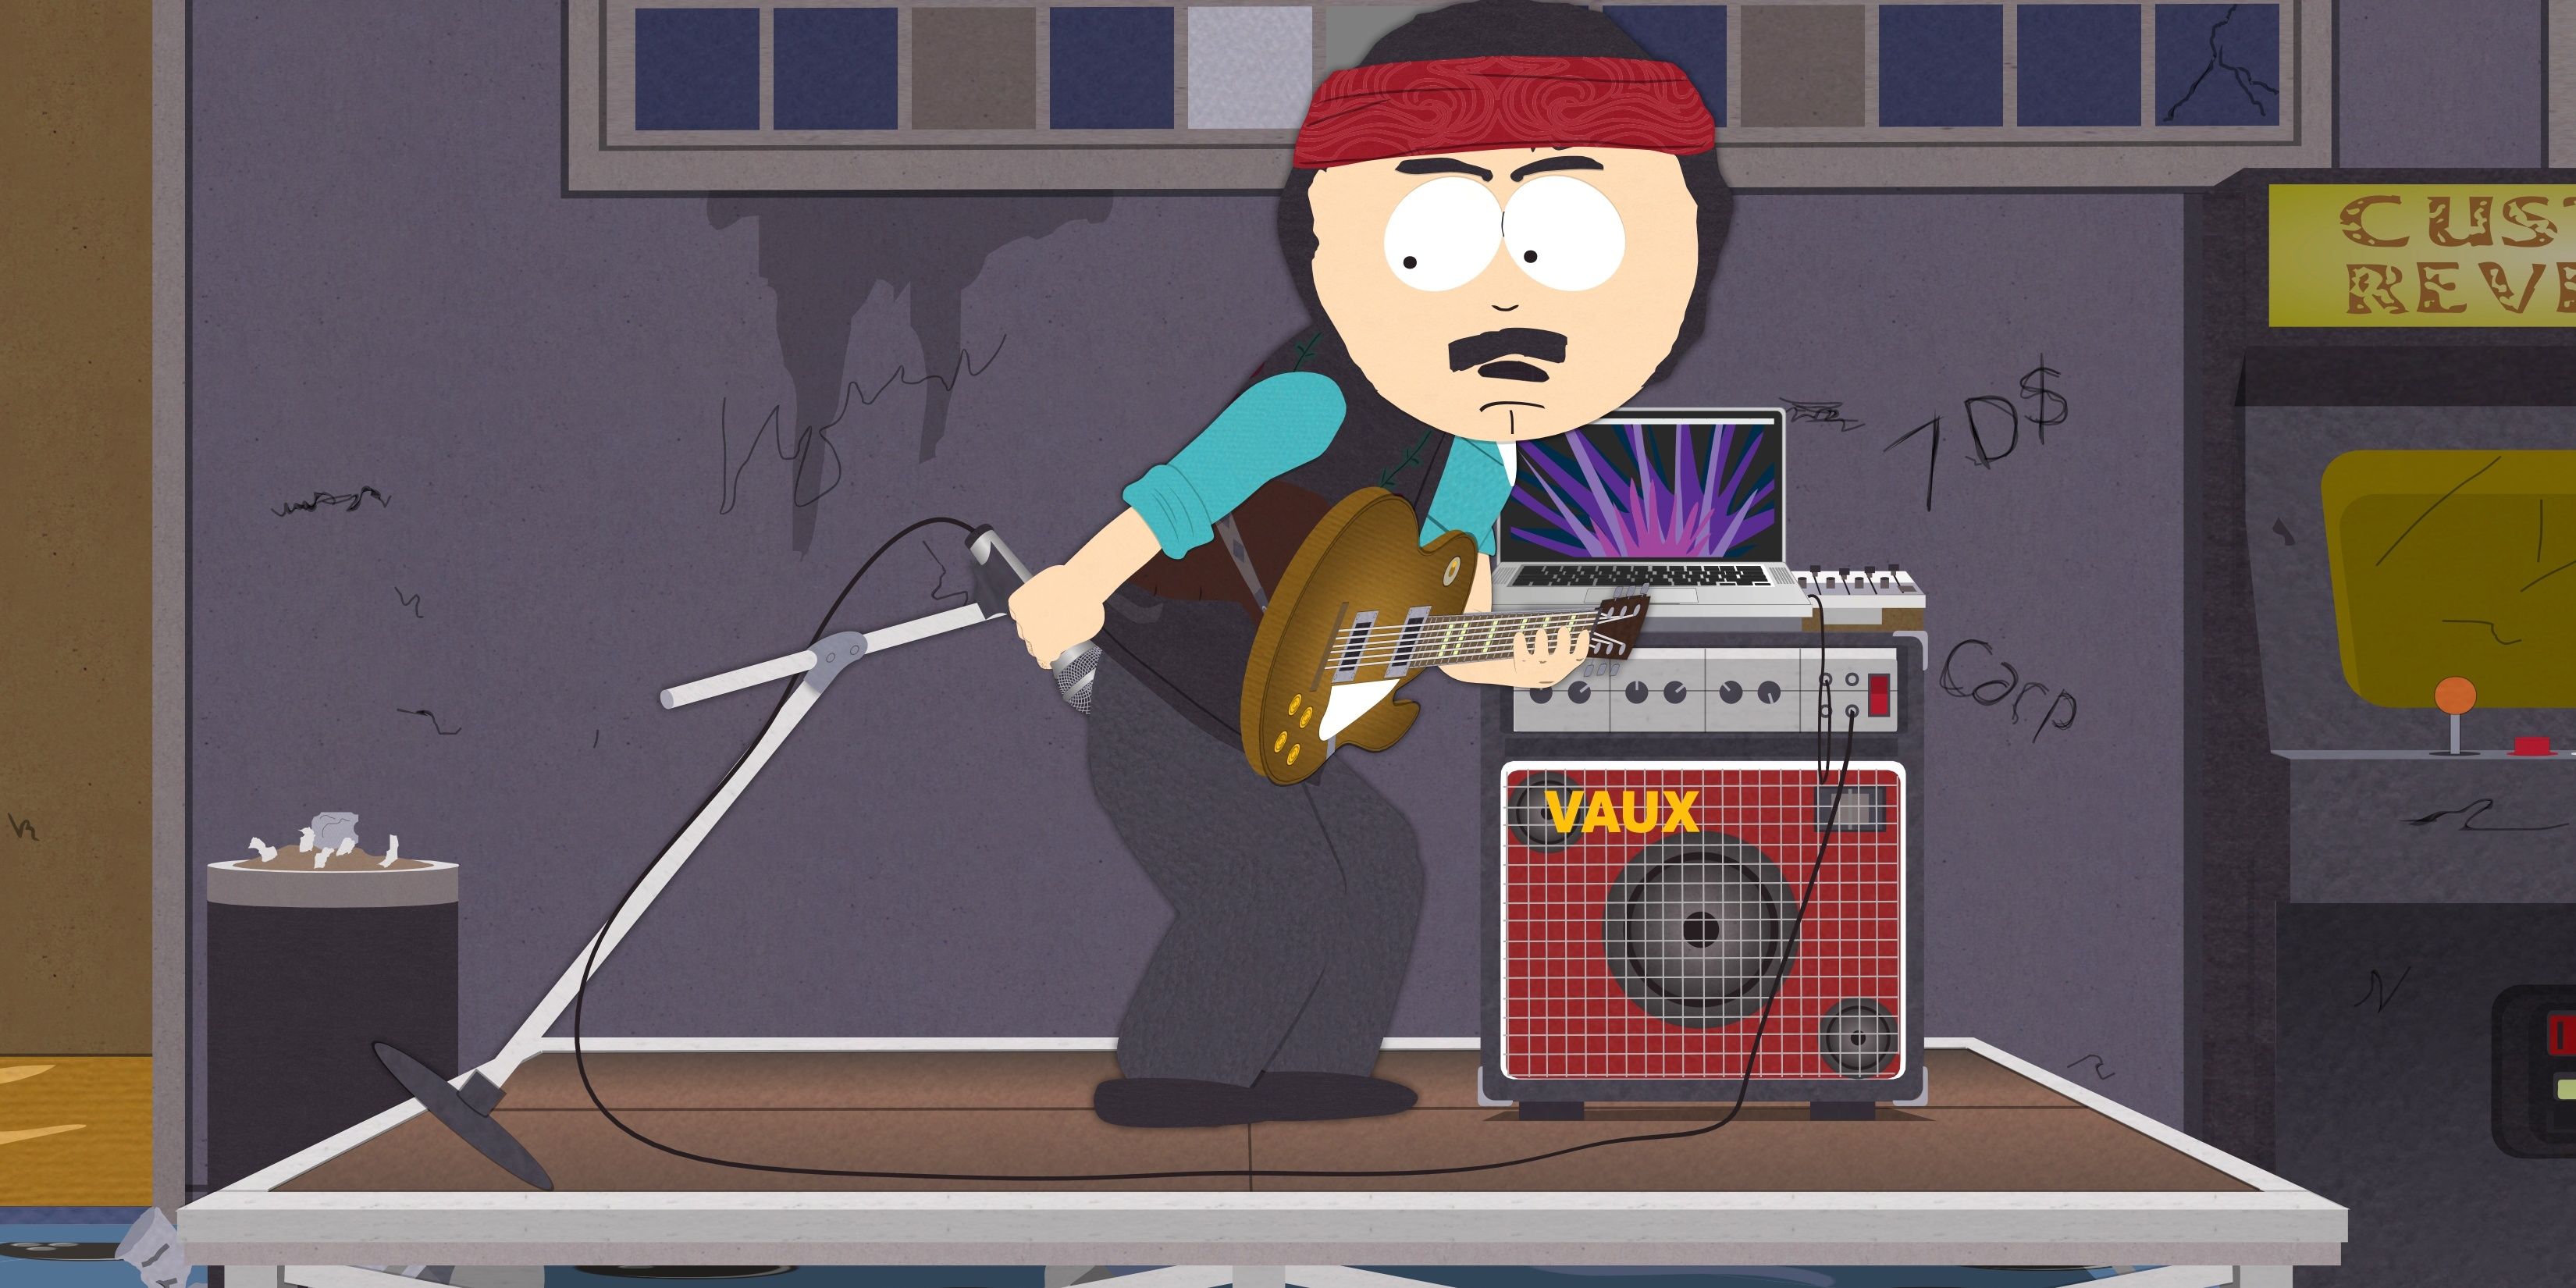 Randy in You're Getting Old, a South Park episode